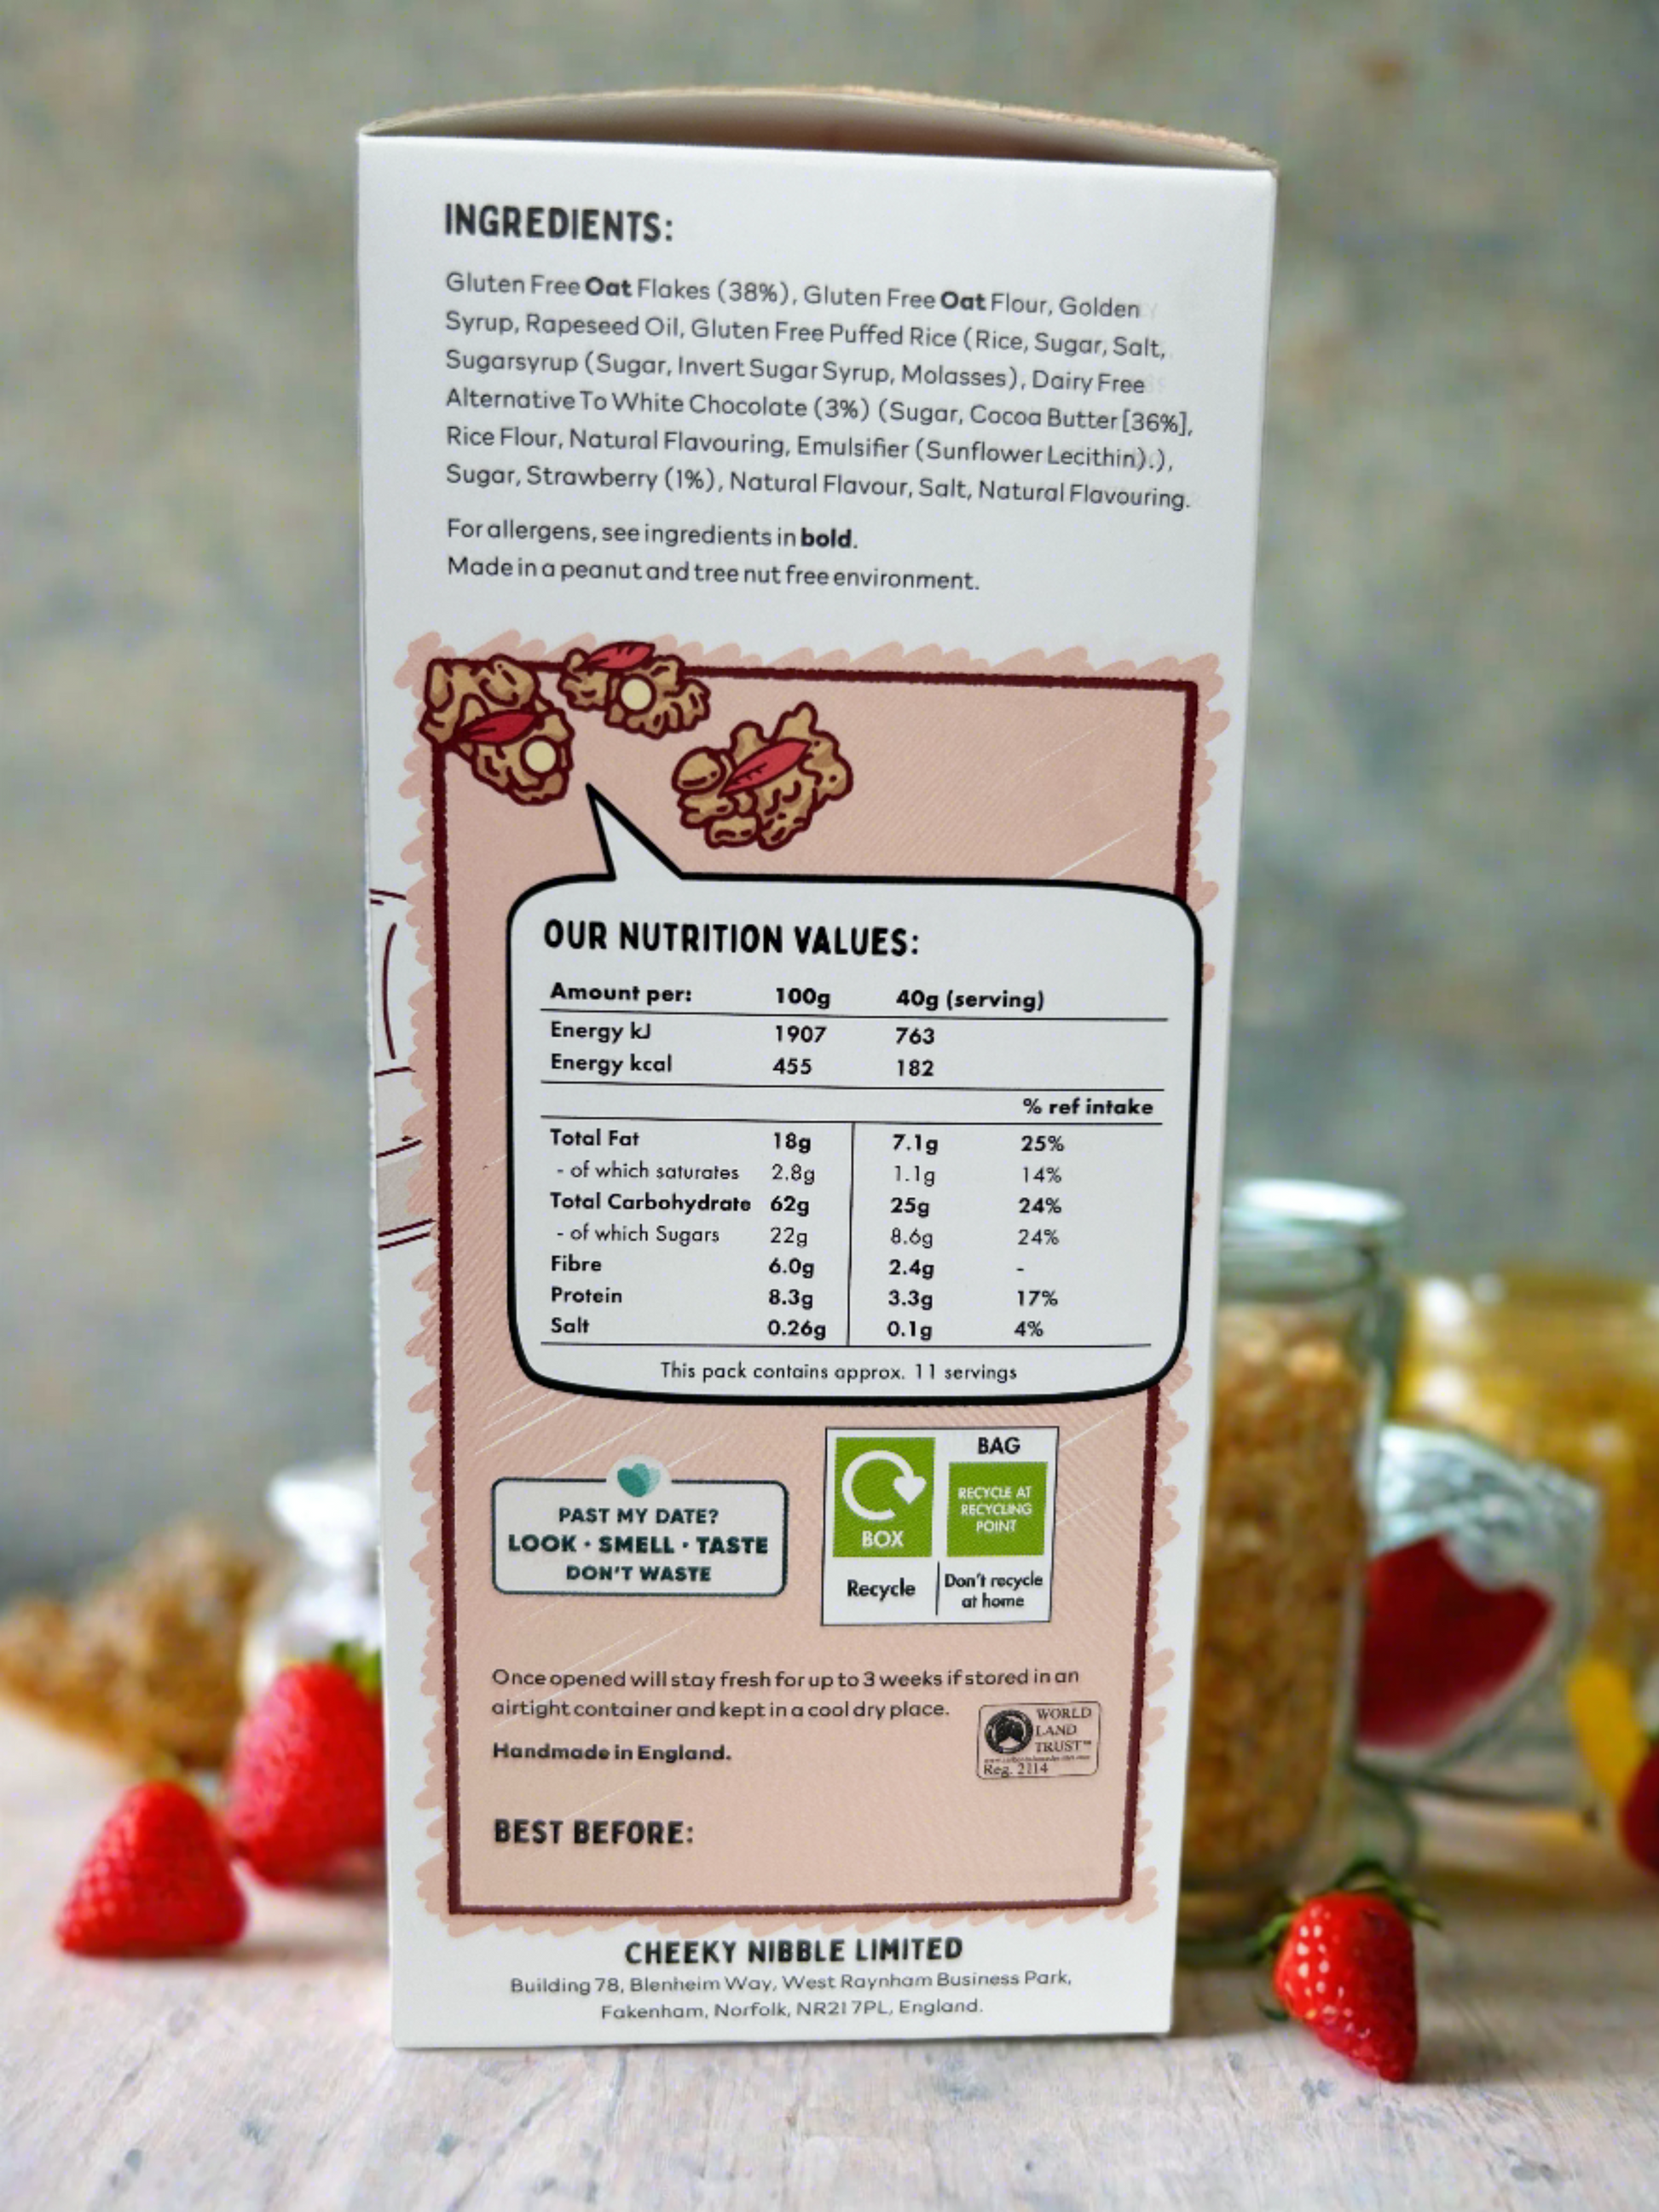 A cereal box featuring prominent nutritional information on its packaging. The label displays details such as serving size, calories per serving, macronutrient breakdown (including protein, fat, and carbohydrates), and key vitamins and minerals. The background of the box may include graphics or images related to healthy living, such as fresh fruits, grains, or active individuals engaging in exercise. 